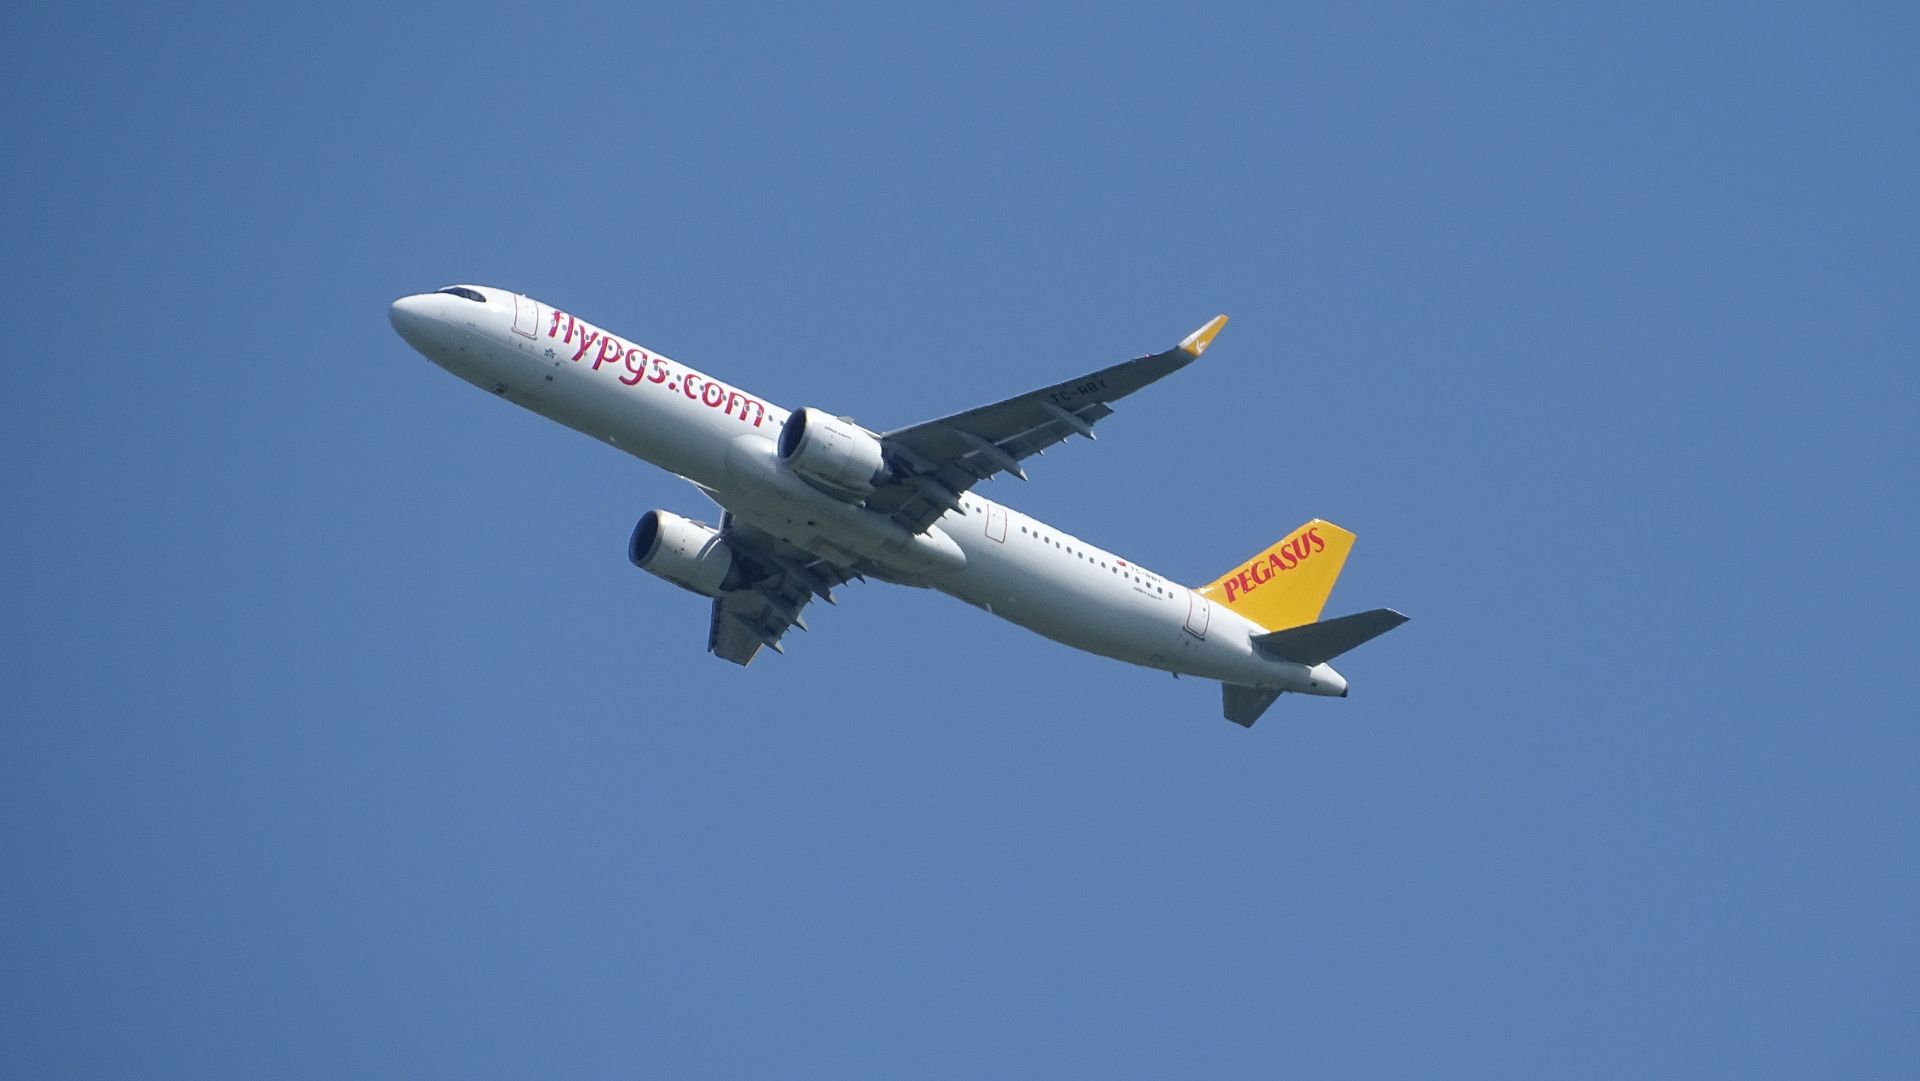 TC-RBY Airbus A321-251NX